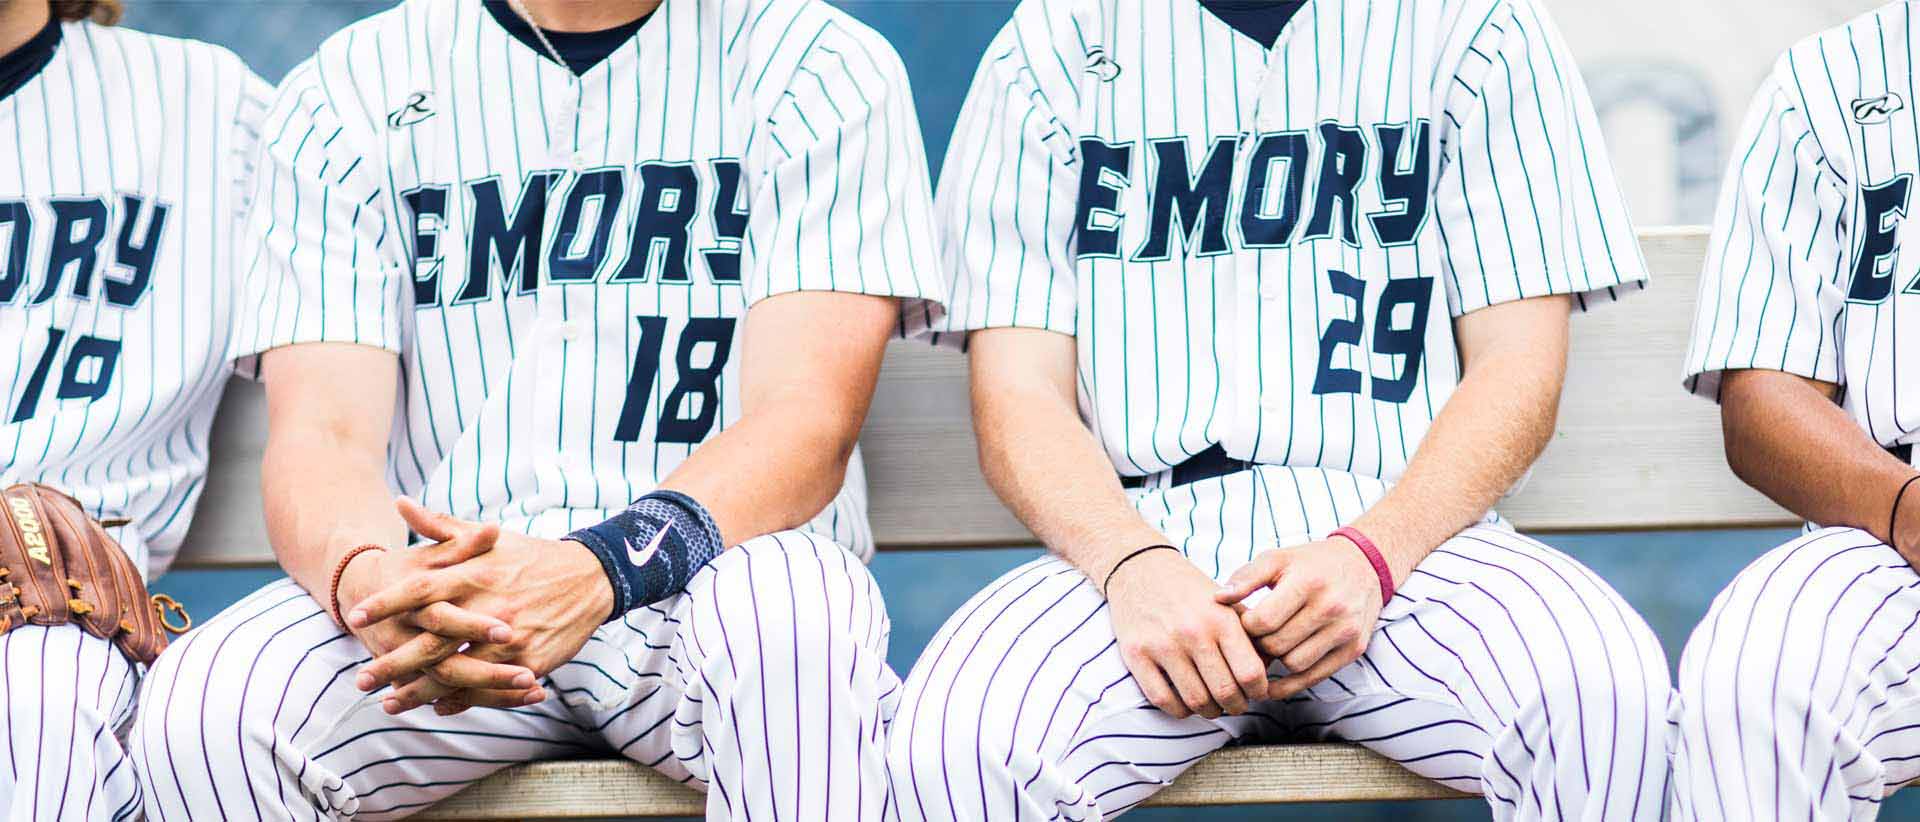 close up of baseball players uniforms while they sit in dugout